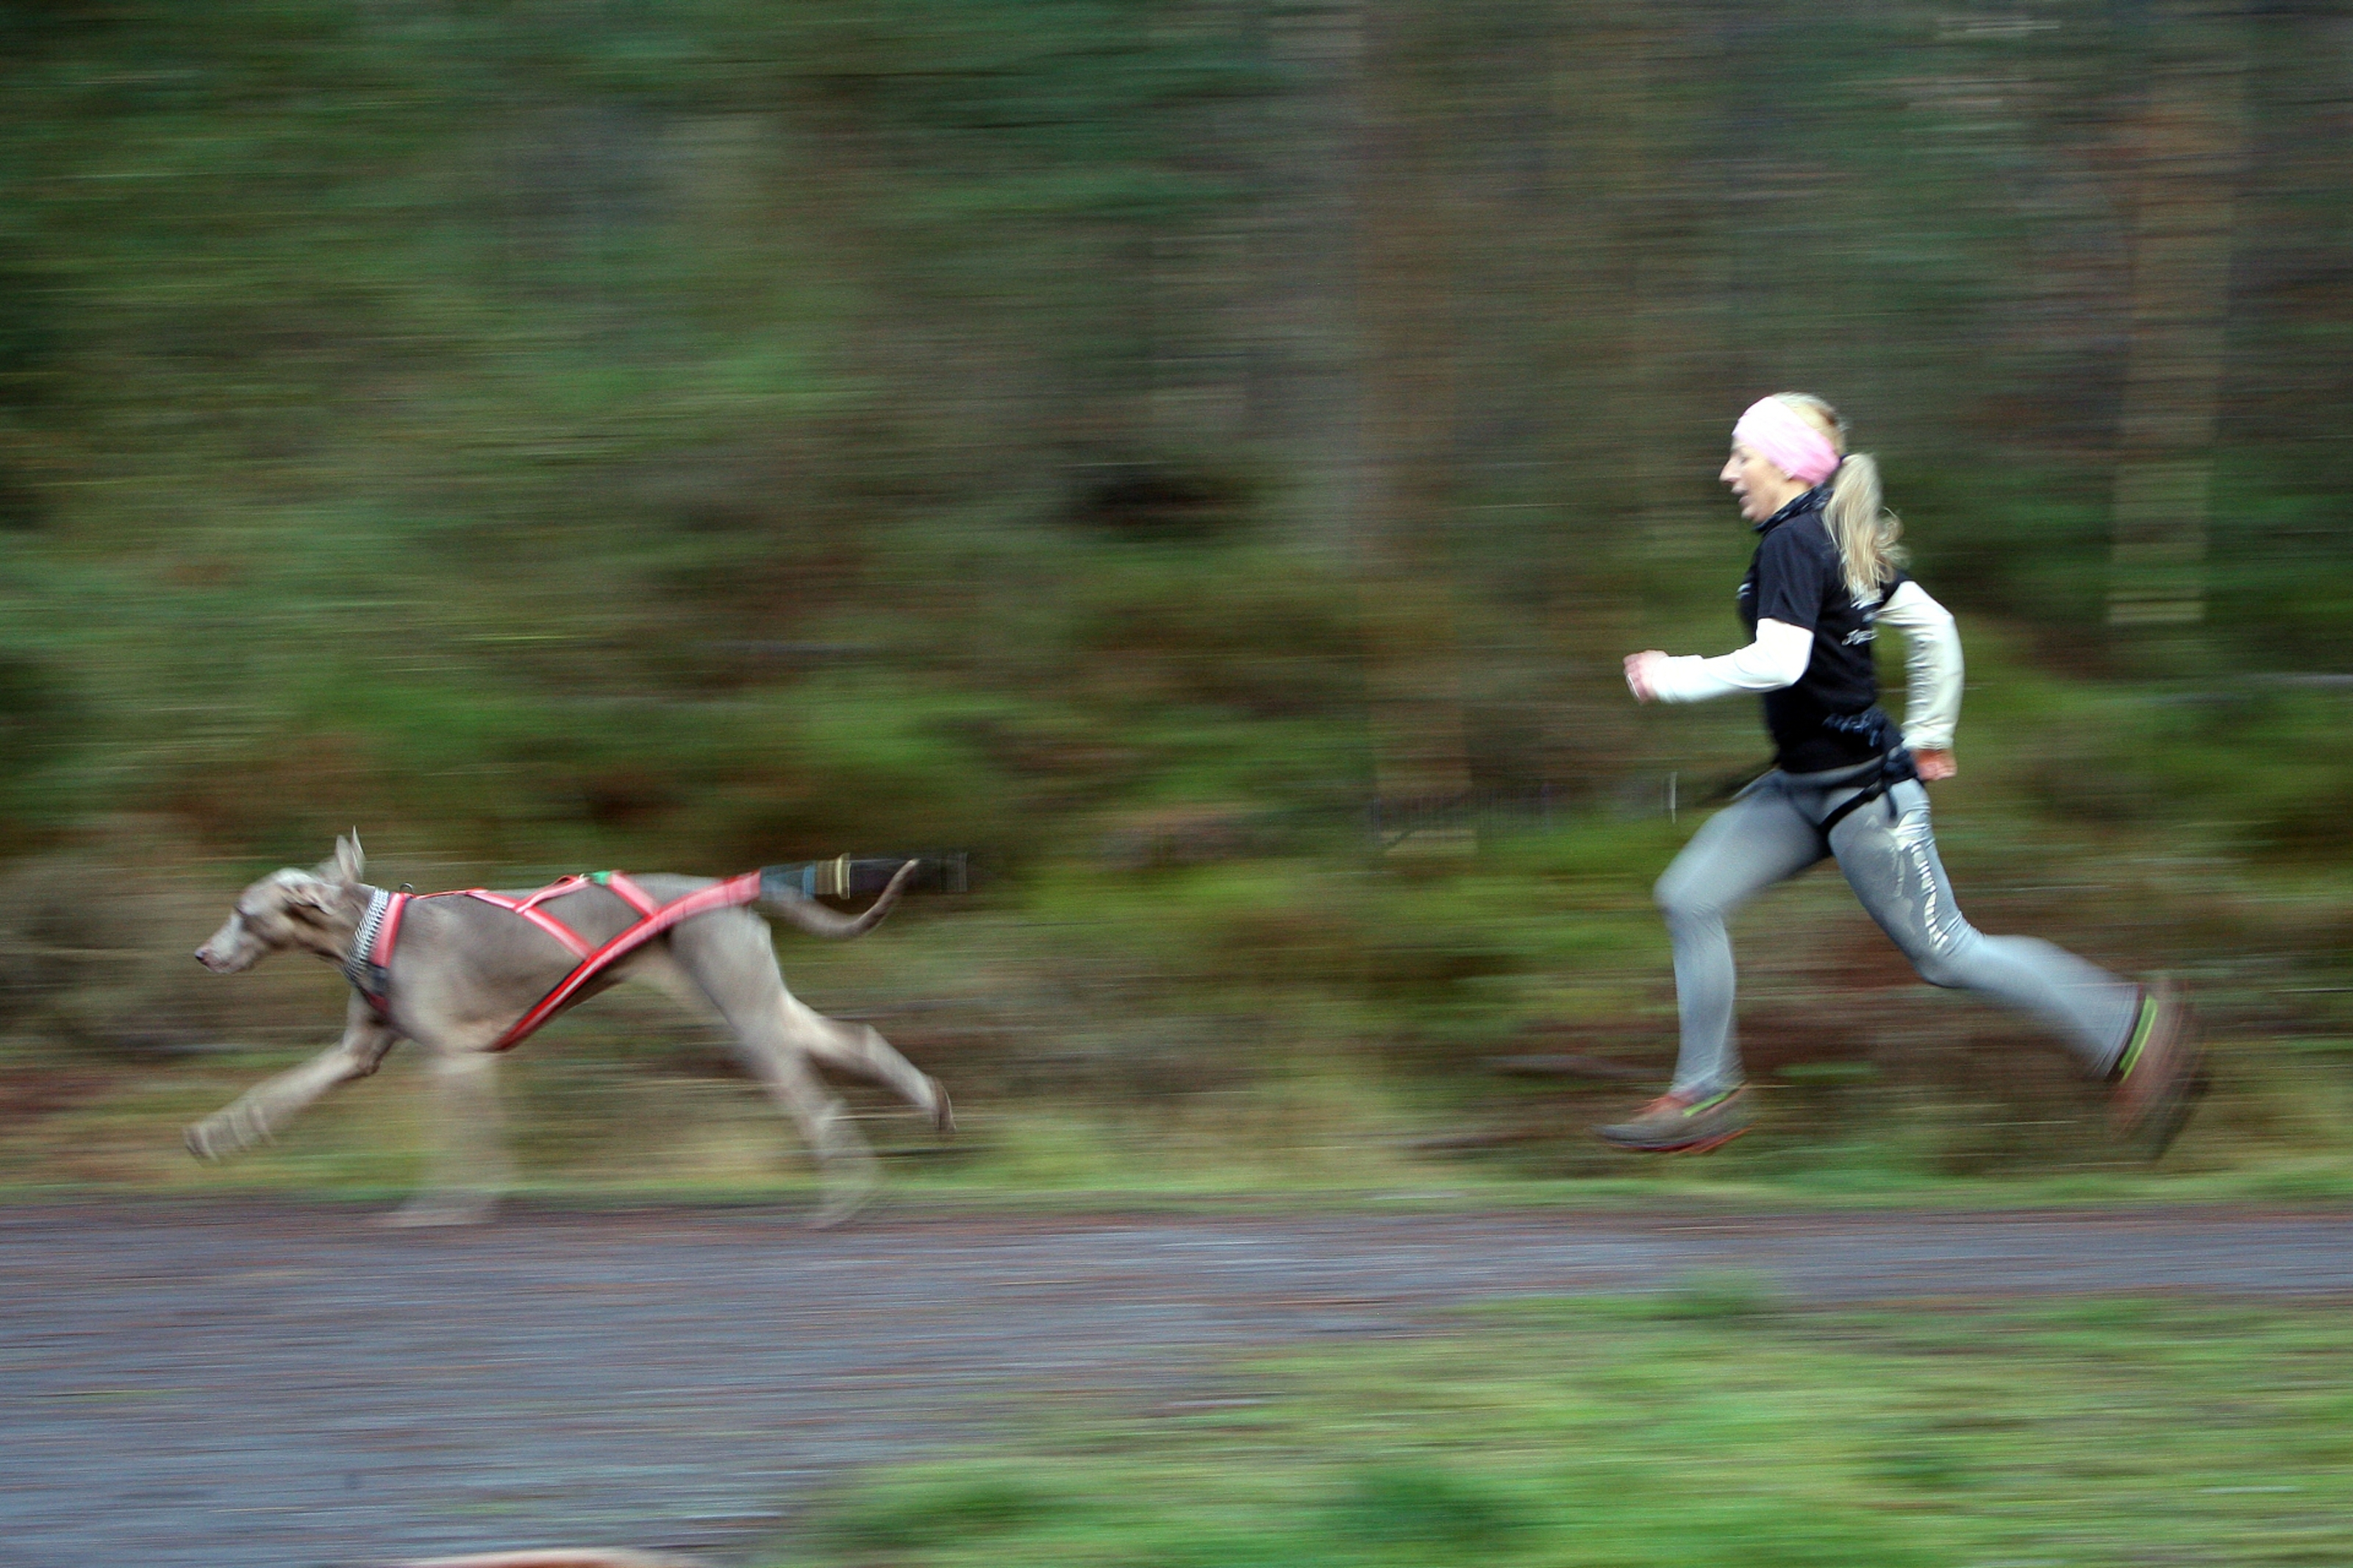 Linzi Melville and her dog Indie running in Heatherhall Woods near Ladybank.